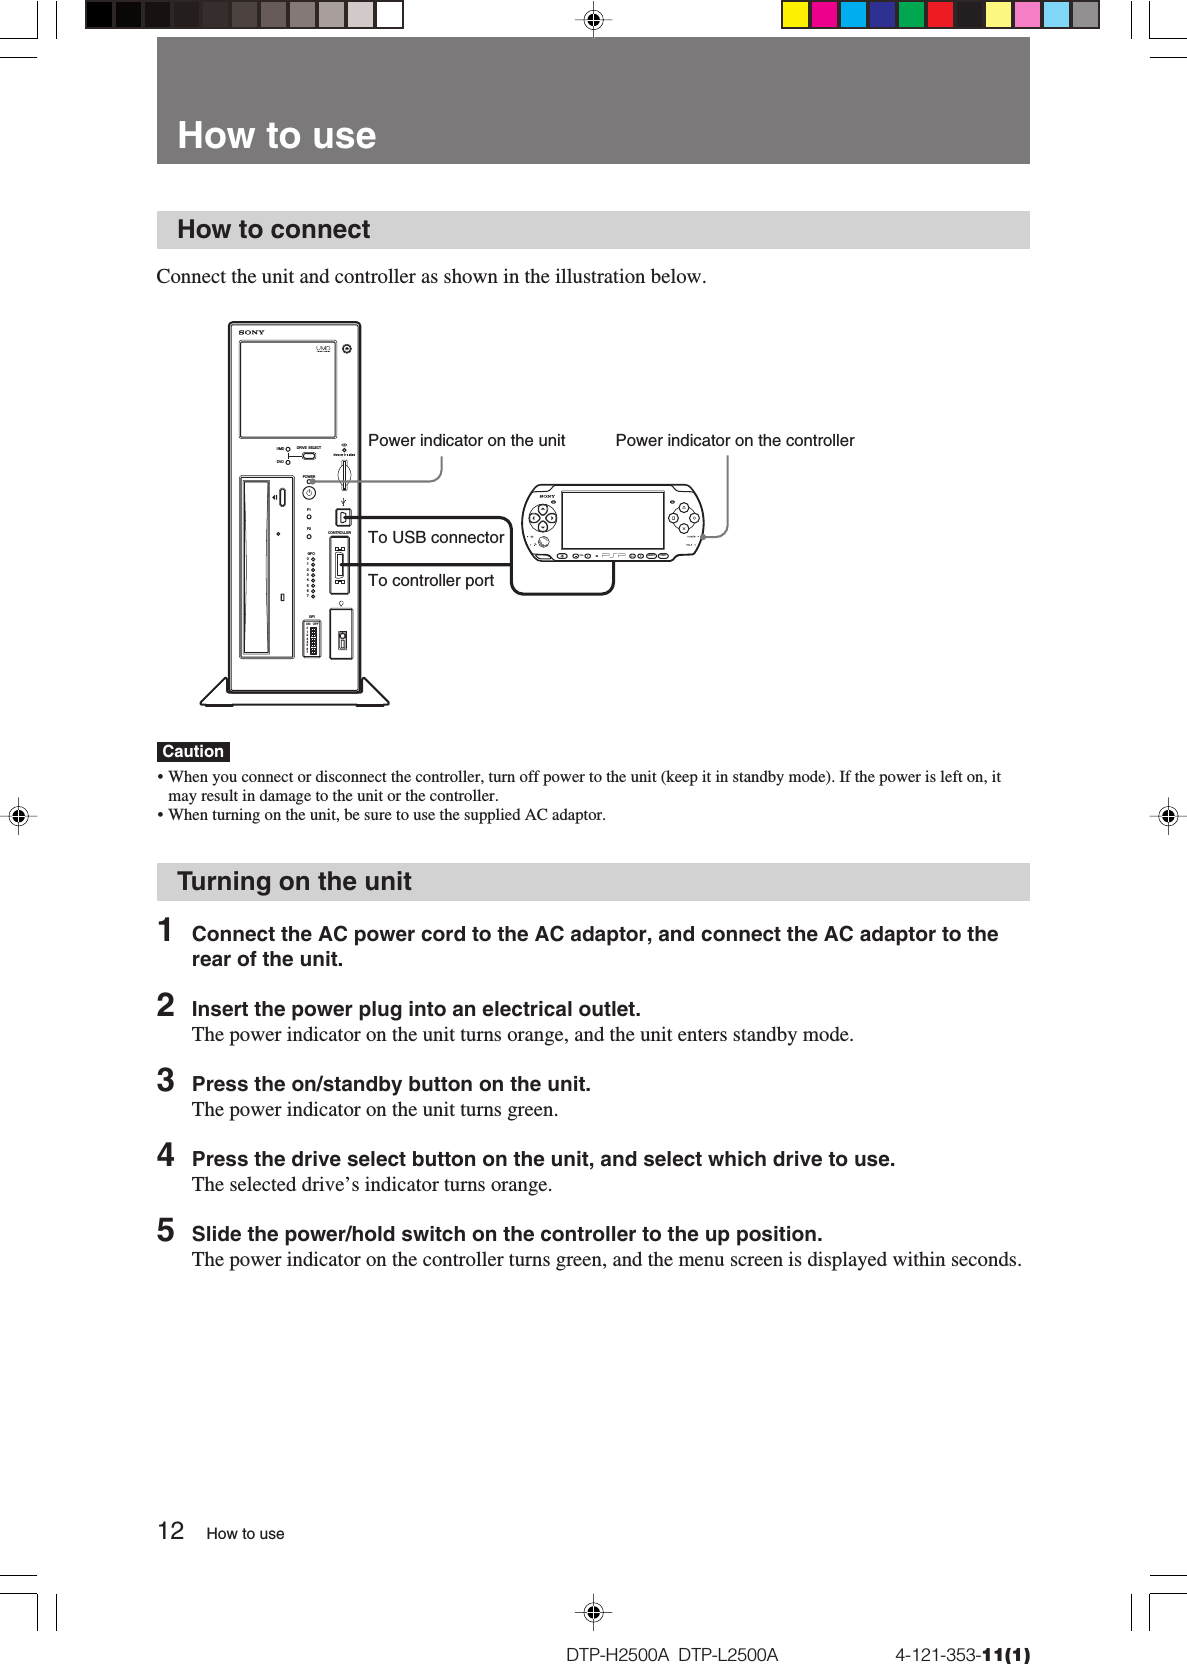 12DTP-H2500A  DTP-L2500A                          4-121-353-11(1)How to connectConnect the unit and controller as shown in the illustration below.Caution• When you connect or disconnect the controller, turn off power to the unit (keep it in standby mode). If the power is left on, itmay result in damage to the unit or the controller.•When turning on the unit, be sure to use the supplied AC adaptor.Turning on the unit1Connect the AC power cord to the AC adaptor, and connect the AC adaptor to therear of the unit.2Insert the power plug into an electrical outlet.The power indicator on the unit turns orange, and the unit enters standby mode.3Press the on/standby button on the unit.The power indicator on the unit turns green.4Press the drive select button on the unit, and select which drive to use.The selected drive’s indicator turns orange.5Slide the power/hold switch on the controller to the up position.The power indicator on the controller turns green, and the menu screen is displayed within seconds.How to useHow to useDRIVE  SELECTPOWERF1F2UMDCONTROLLERGPOGPION OFFDVD0765432101234567SELECT STARTVOLPower indicator on the unit Power indicator on the controllerTo controller portTo USB connector